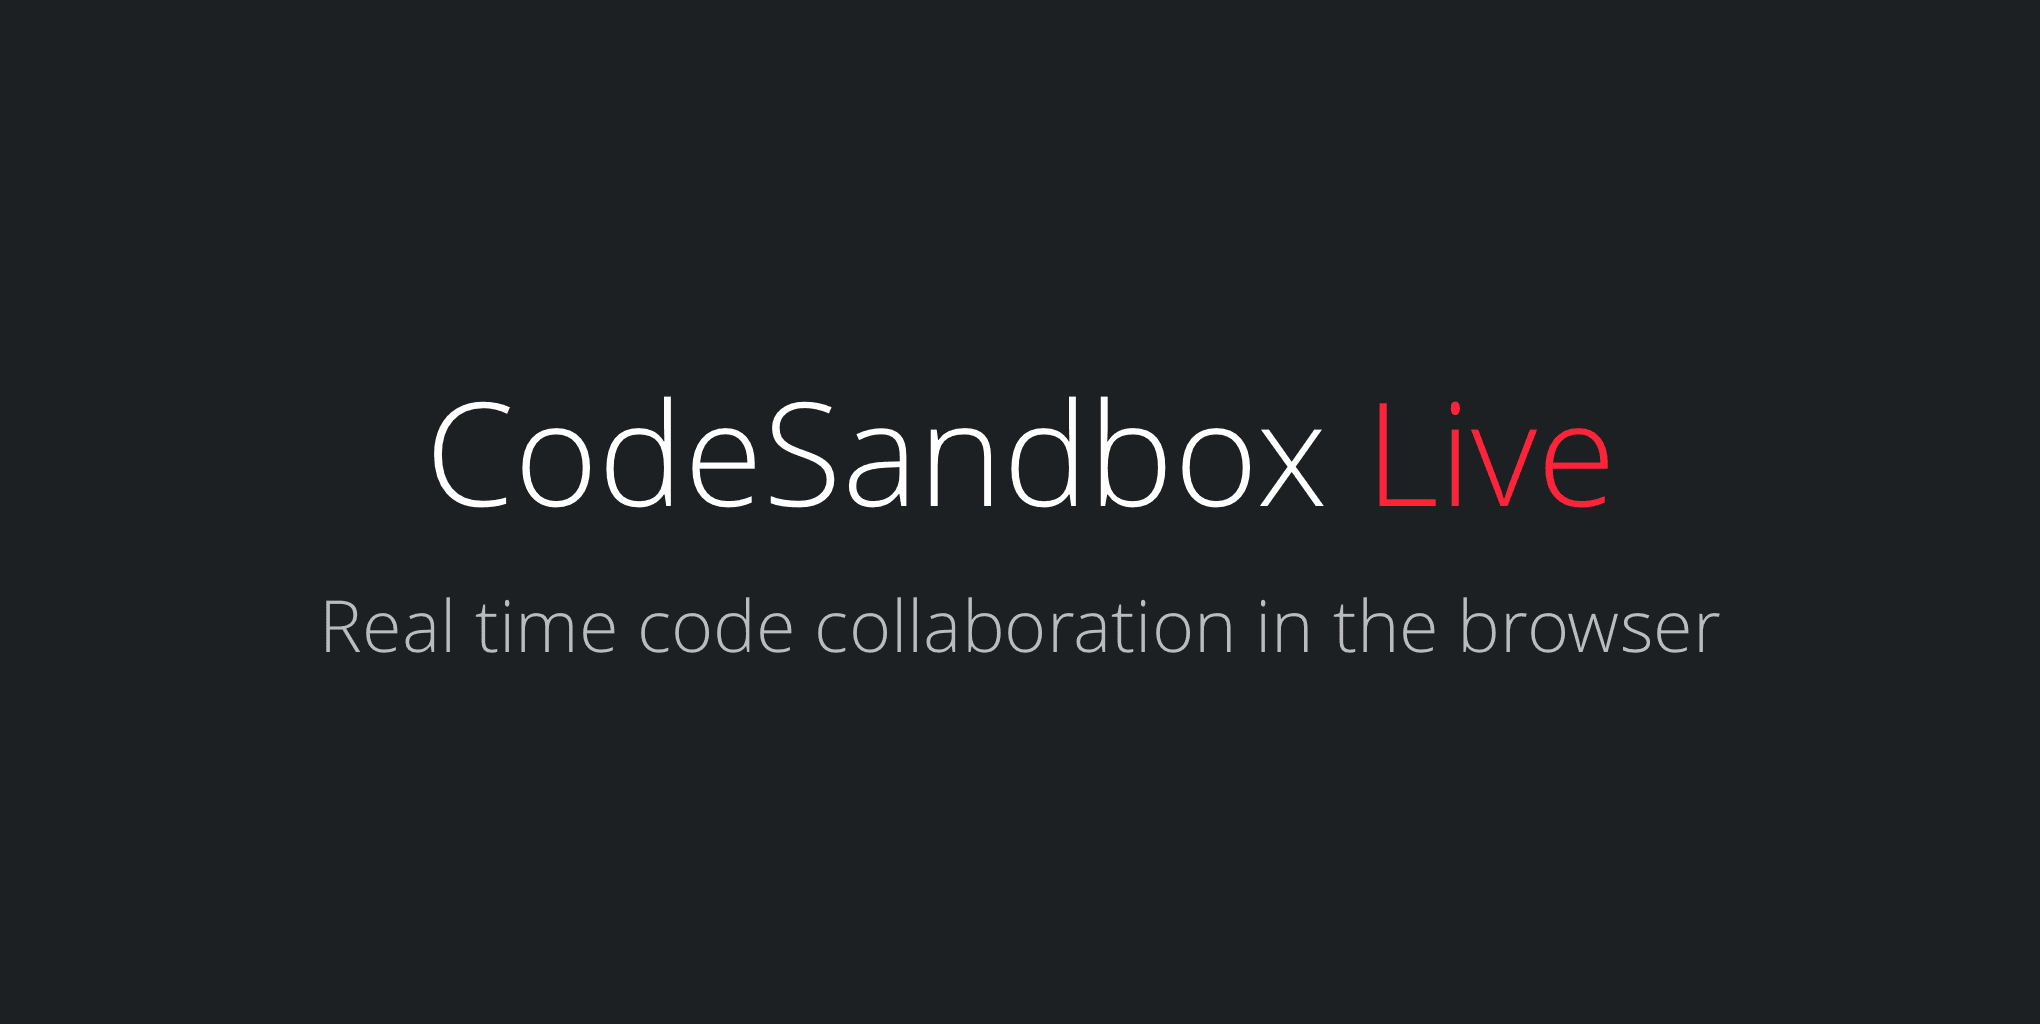 Introducing CodeSandbox Live — real time code collaboration in the browser